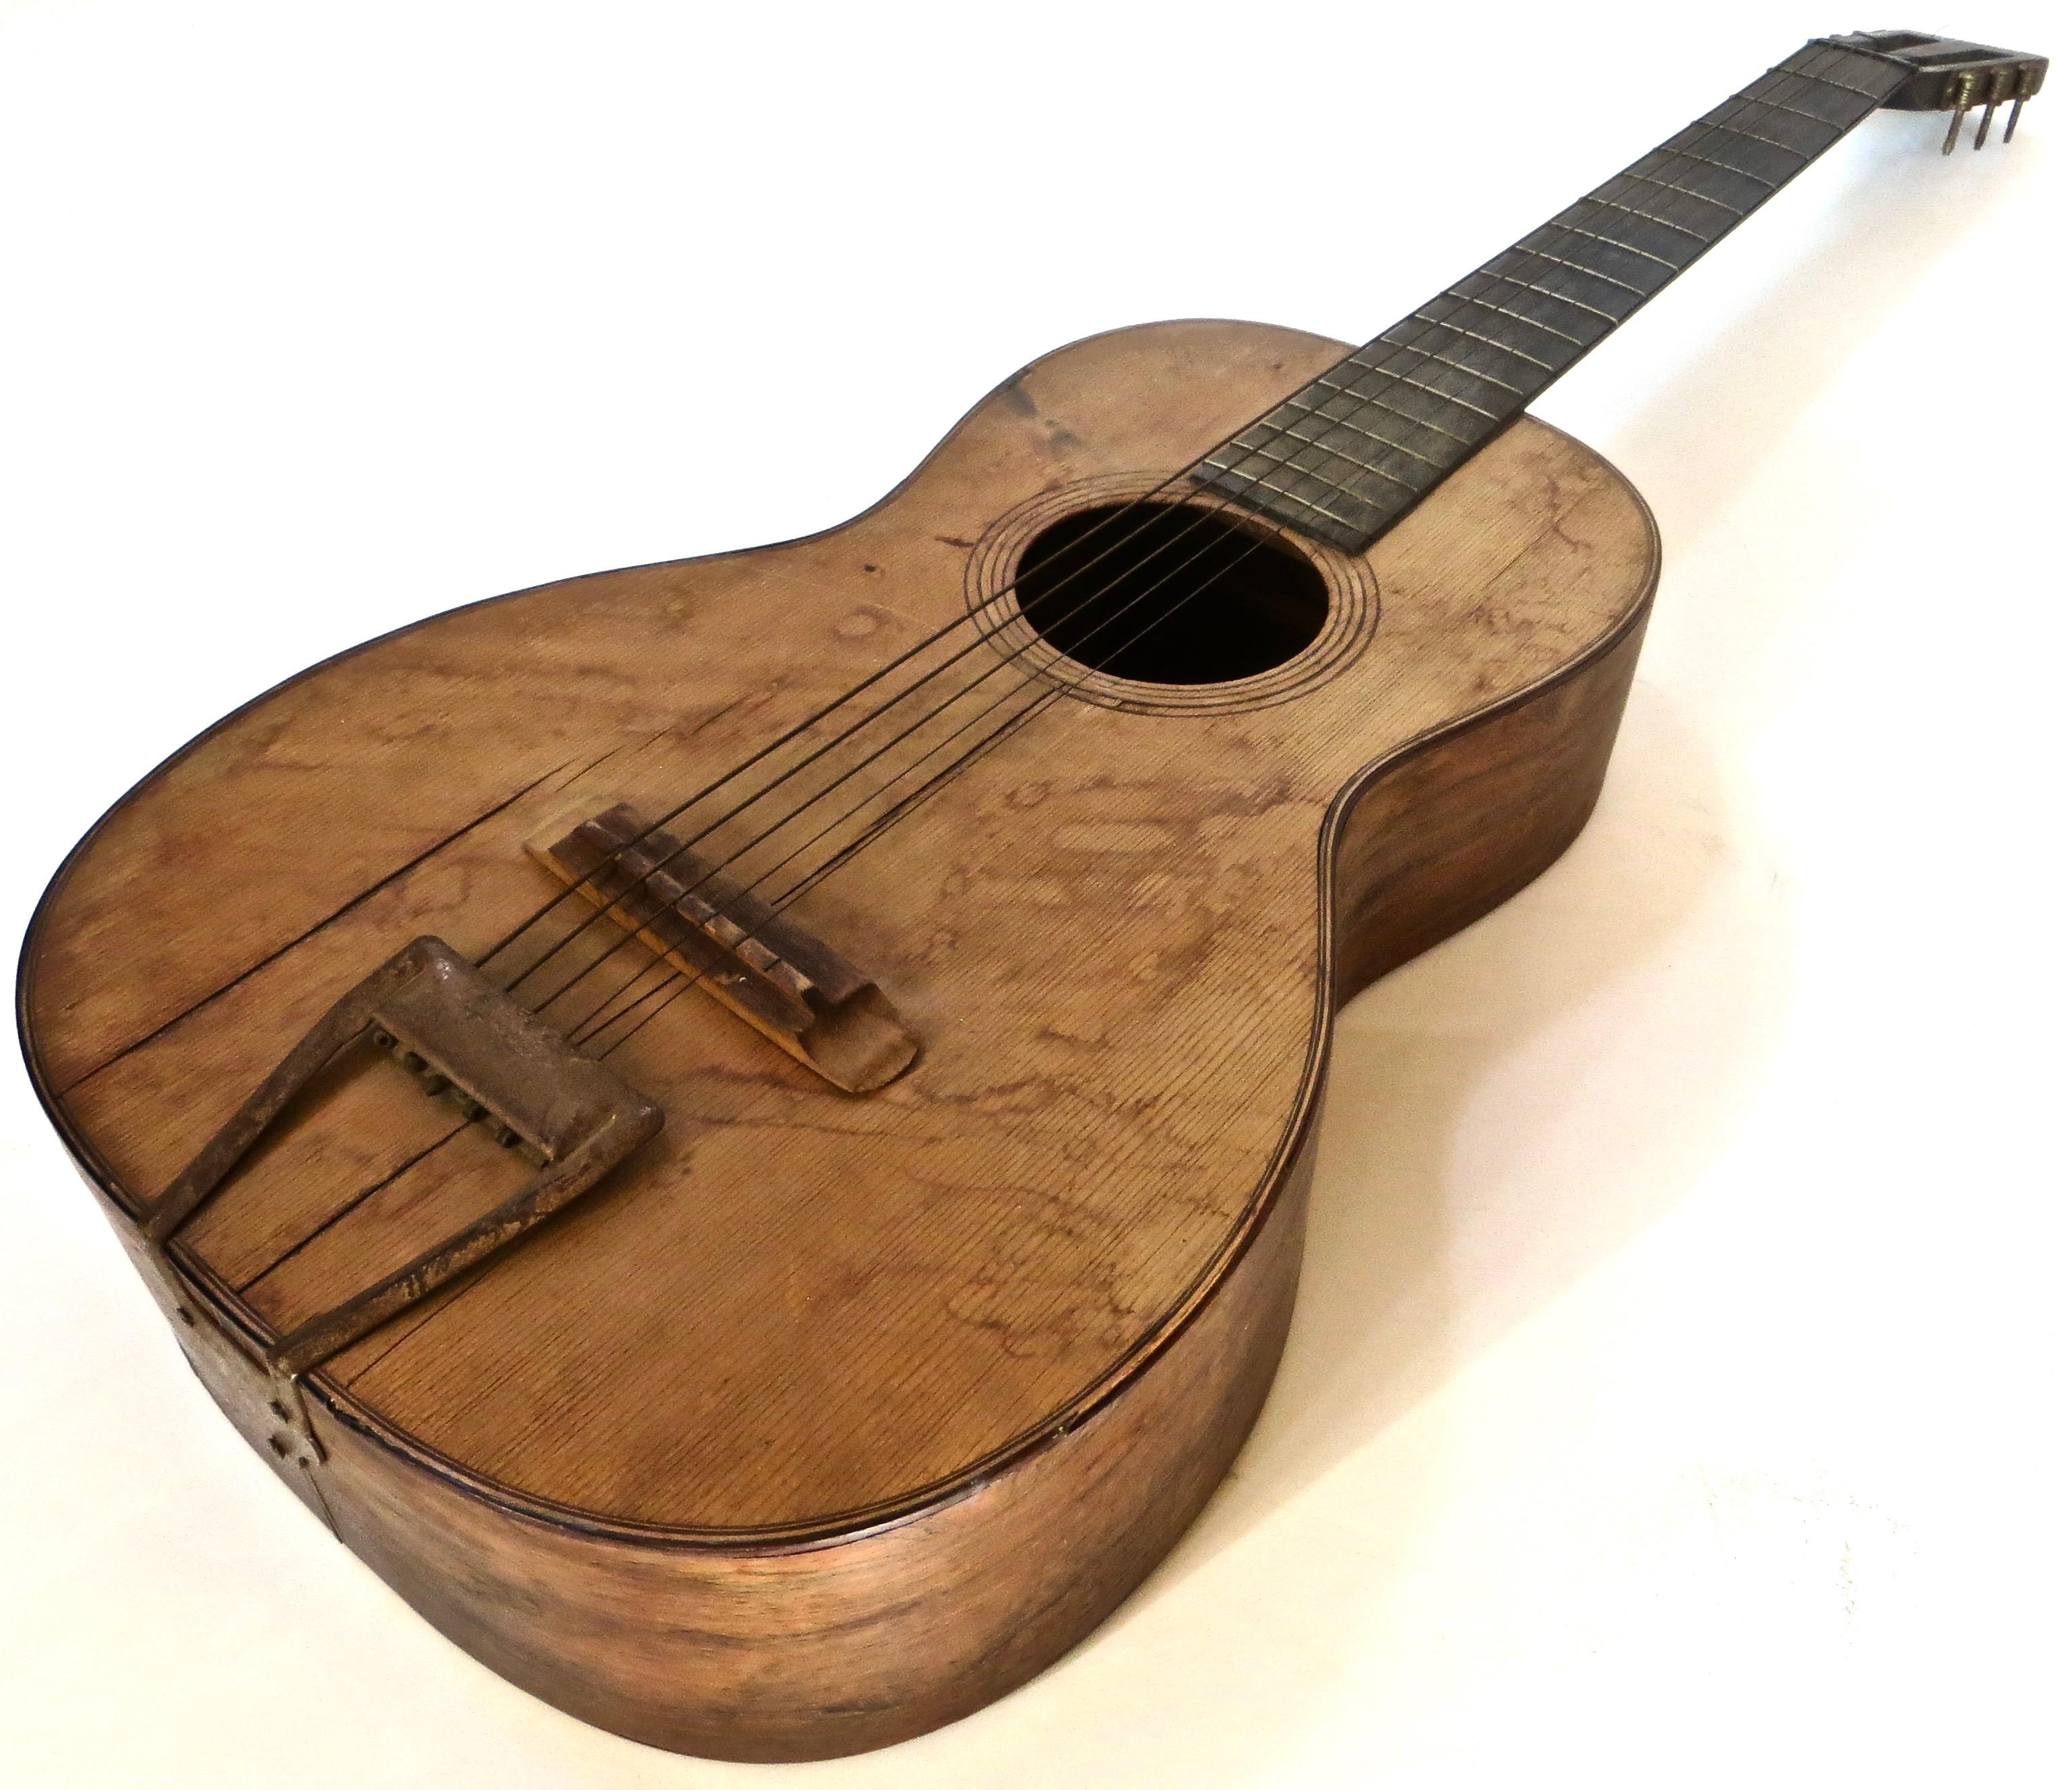 Christian Frederick Martin was born in 1796, and having immigrated to America, he set up shop in New York in 1833, and later in Nazareth, Pennsylvania as well. He would go on to manufacture the finest guitars in the world. This 19th century 